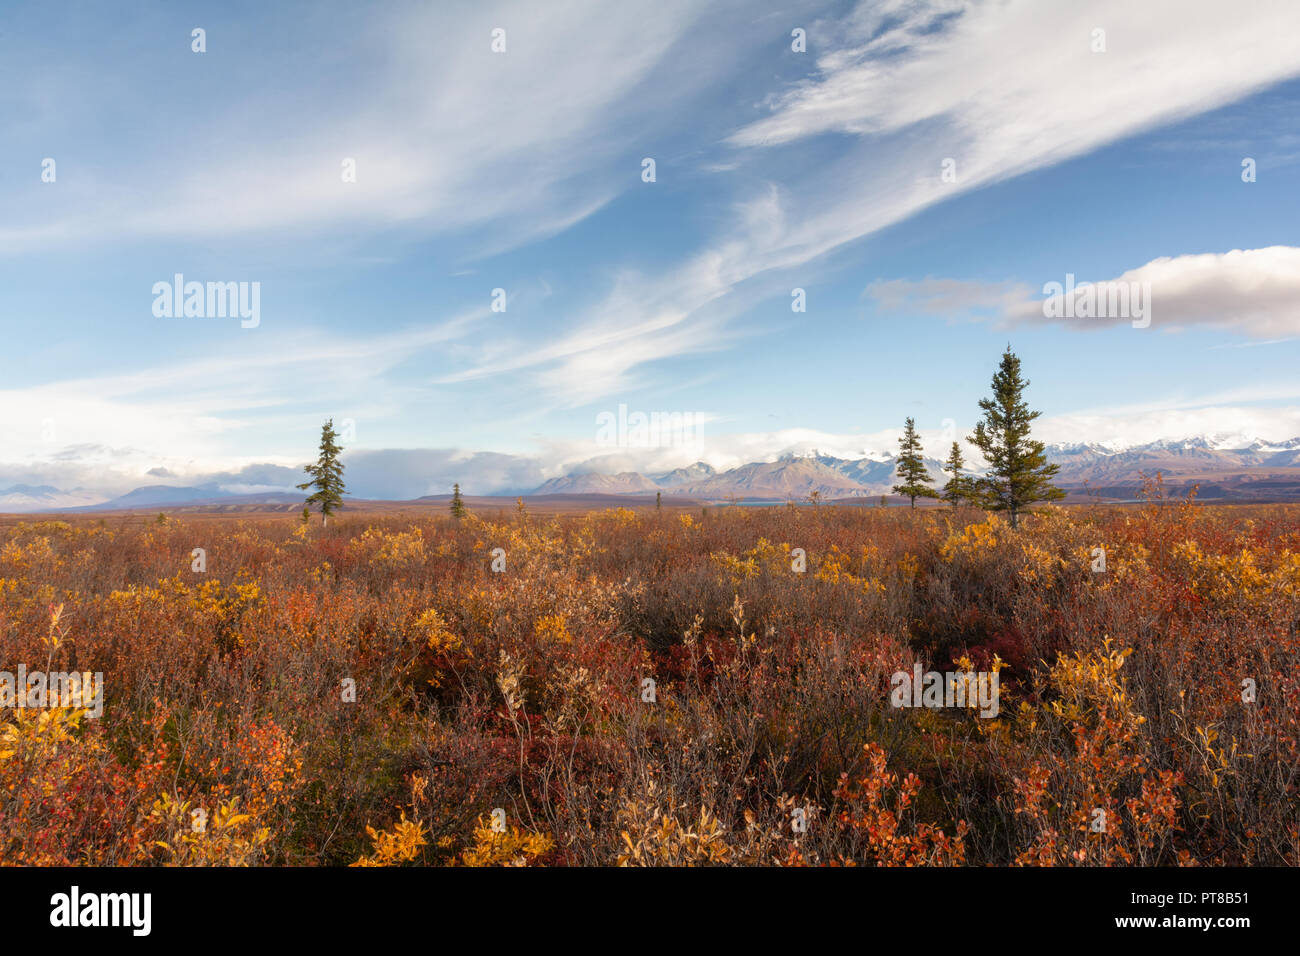 Alaskan scrub land in early fall with mountains clouds and sky Stock Photo